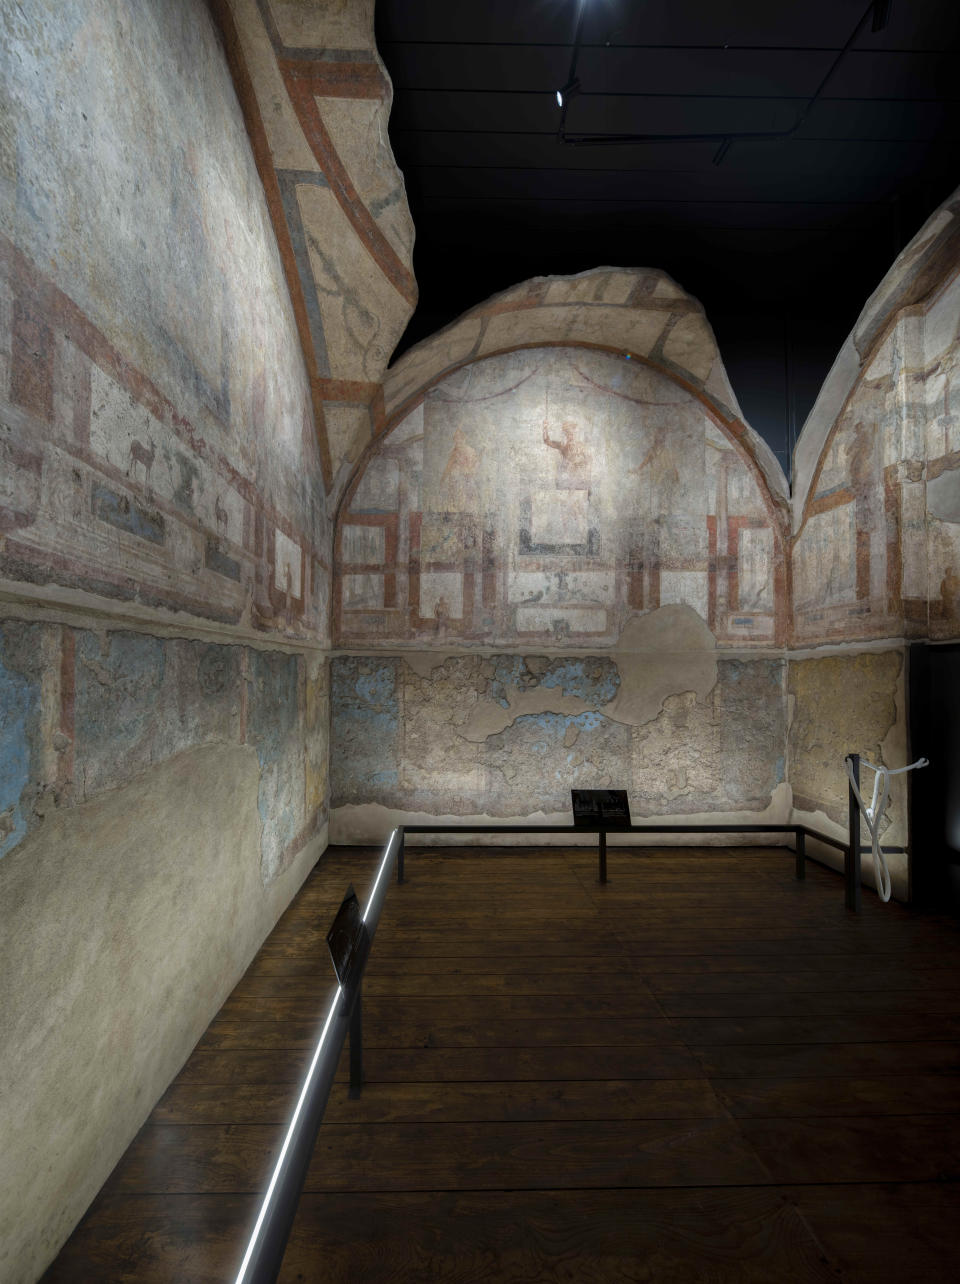 The frescoes coming from the sacellum, a small votive chapel, of a two-story home, or "Domus," dating from around 134-138 AD that was partially destroyed to make way for the construction of the Caracalla public baths, which opened in 216 AD, are on display at the Caracalla archaeological park in Rome, Thursday, June 23, 2022. The frescoed ceiling and walls of a domestic temple honoring Greco-Roman and Egyptian religious deities and believed to have belonged to a wealthy merchant family were first discovered in the mid-19th century about 10 meters (yards) underneath the current ground level of the baths, had been briefly exhibited but has been closed to the public for 30 years. (AP Photo/Domenico Stinellis)